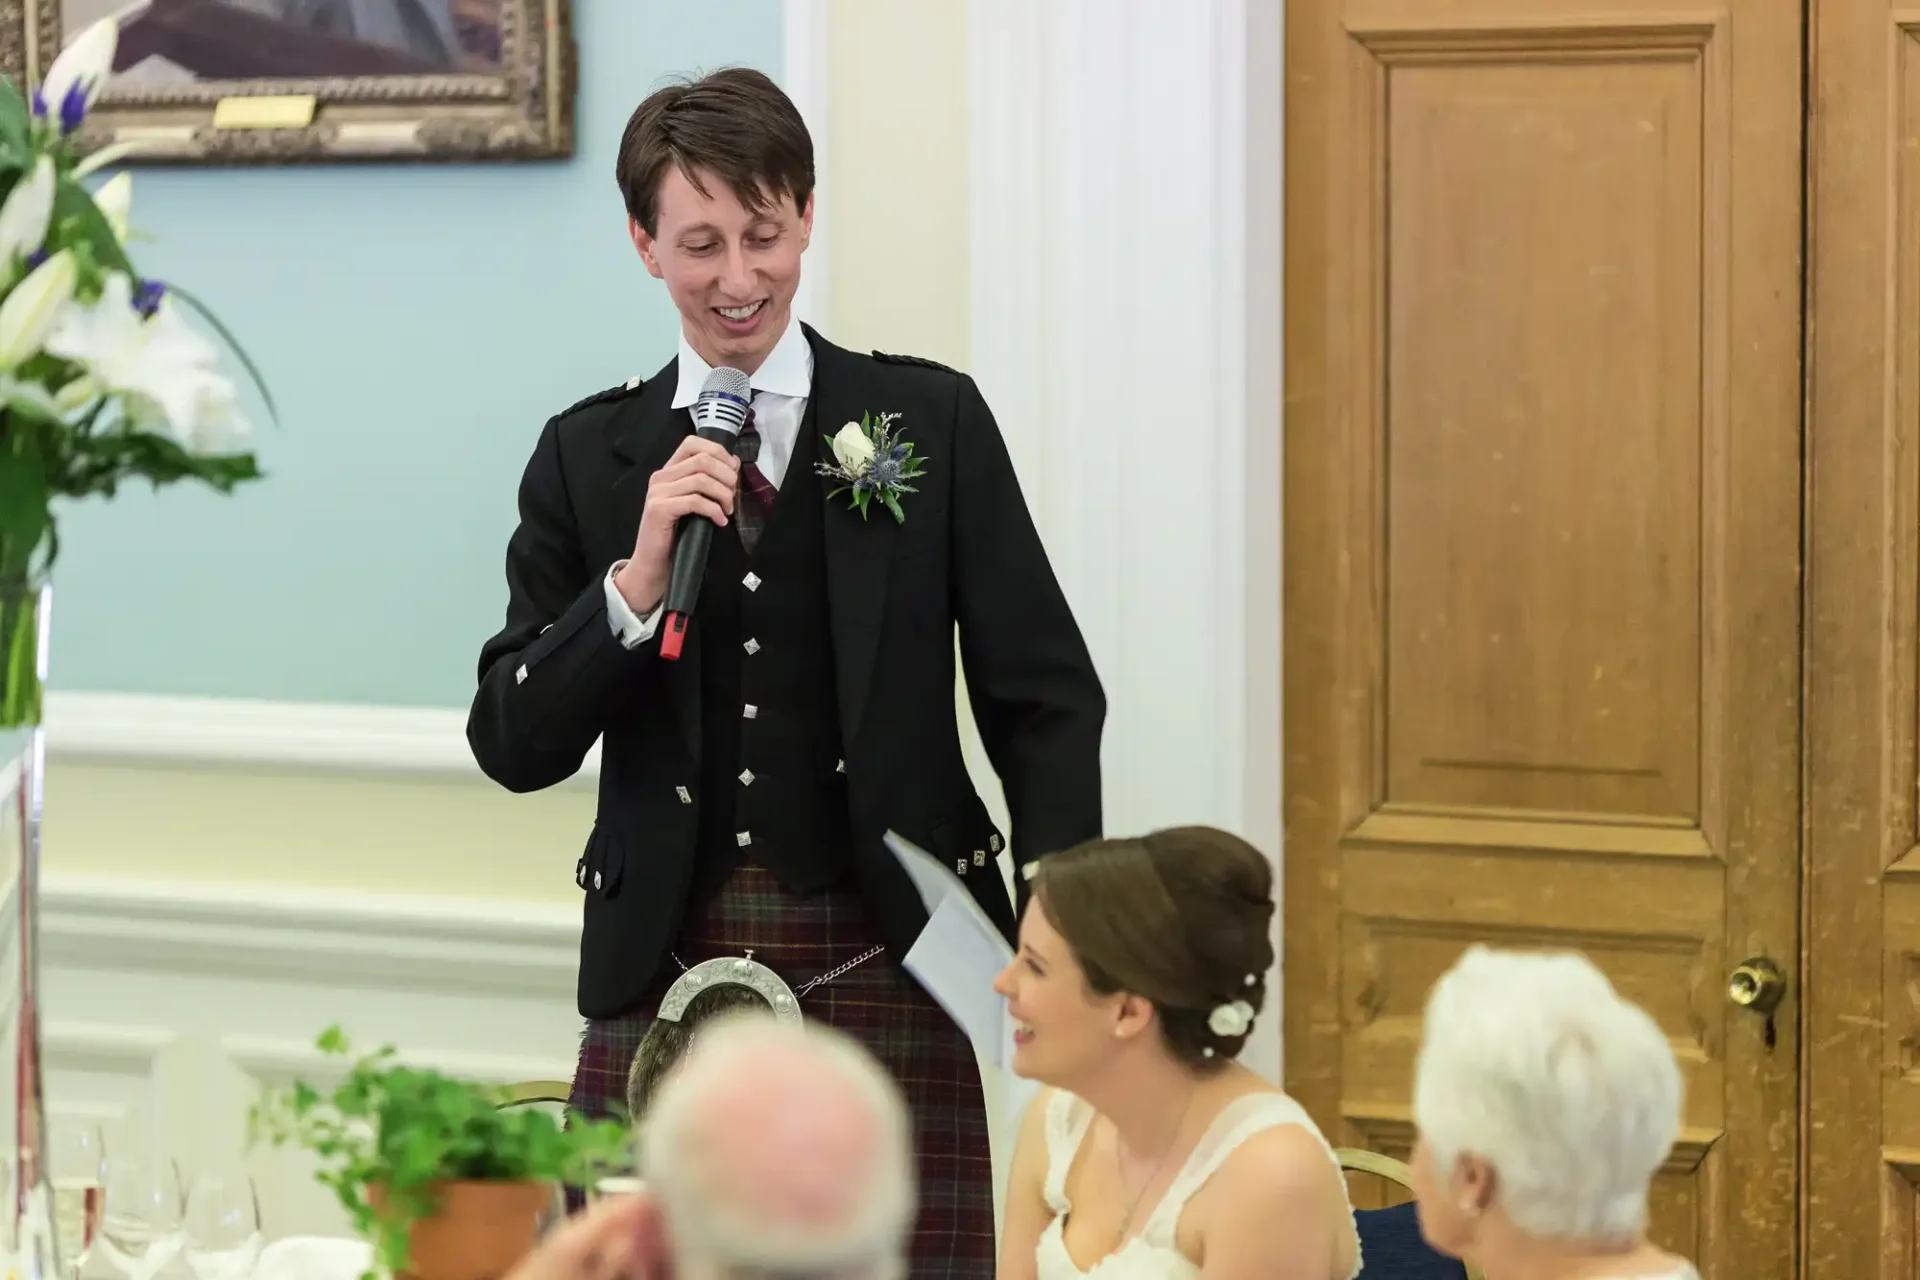 Man in a kilt and jacket speaking into a microphone at a wedding reception, smiling at a seated woman who is looking at him.